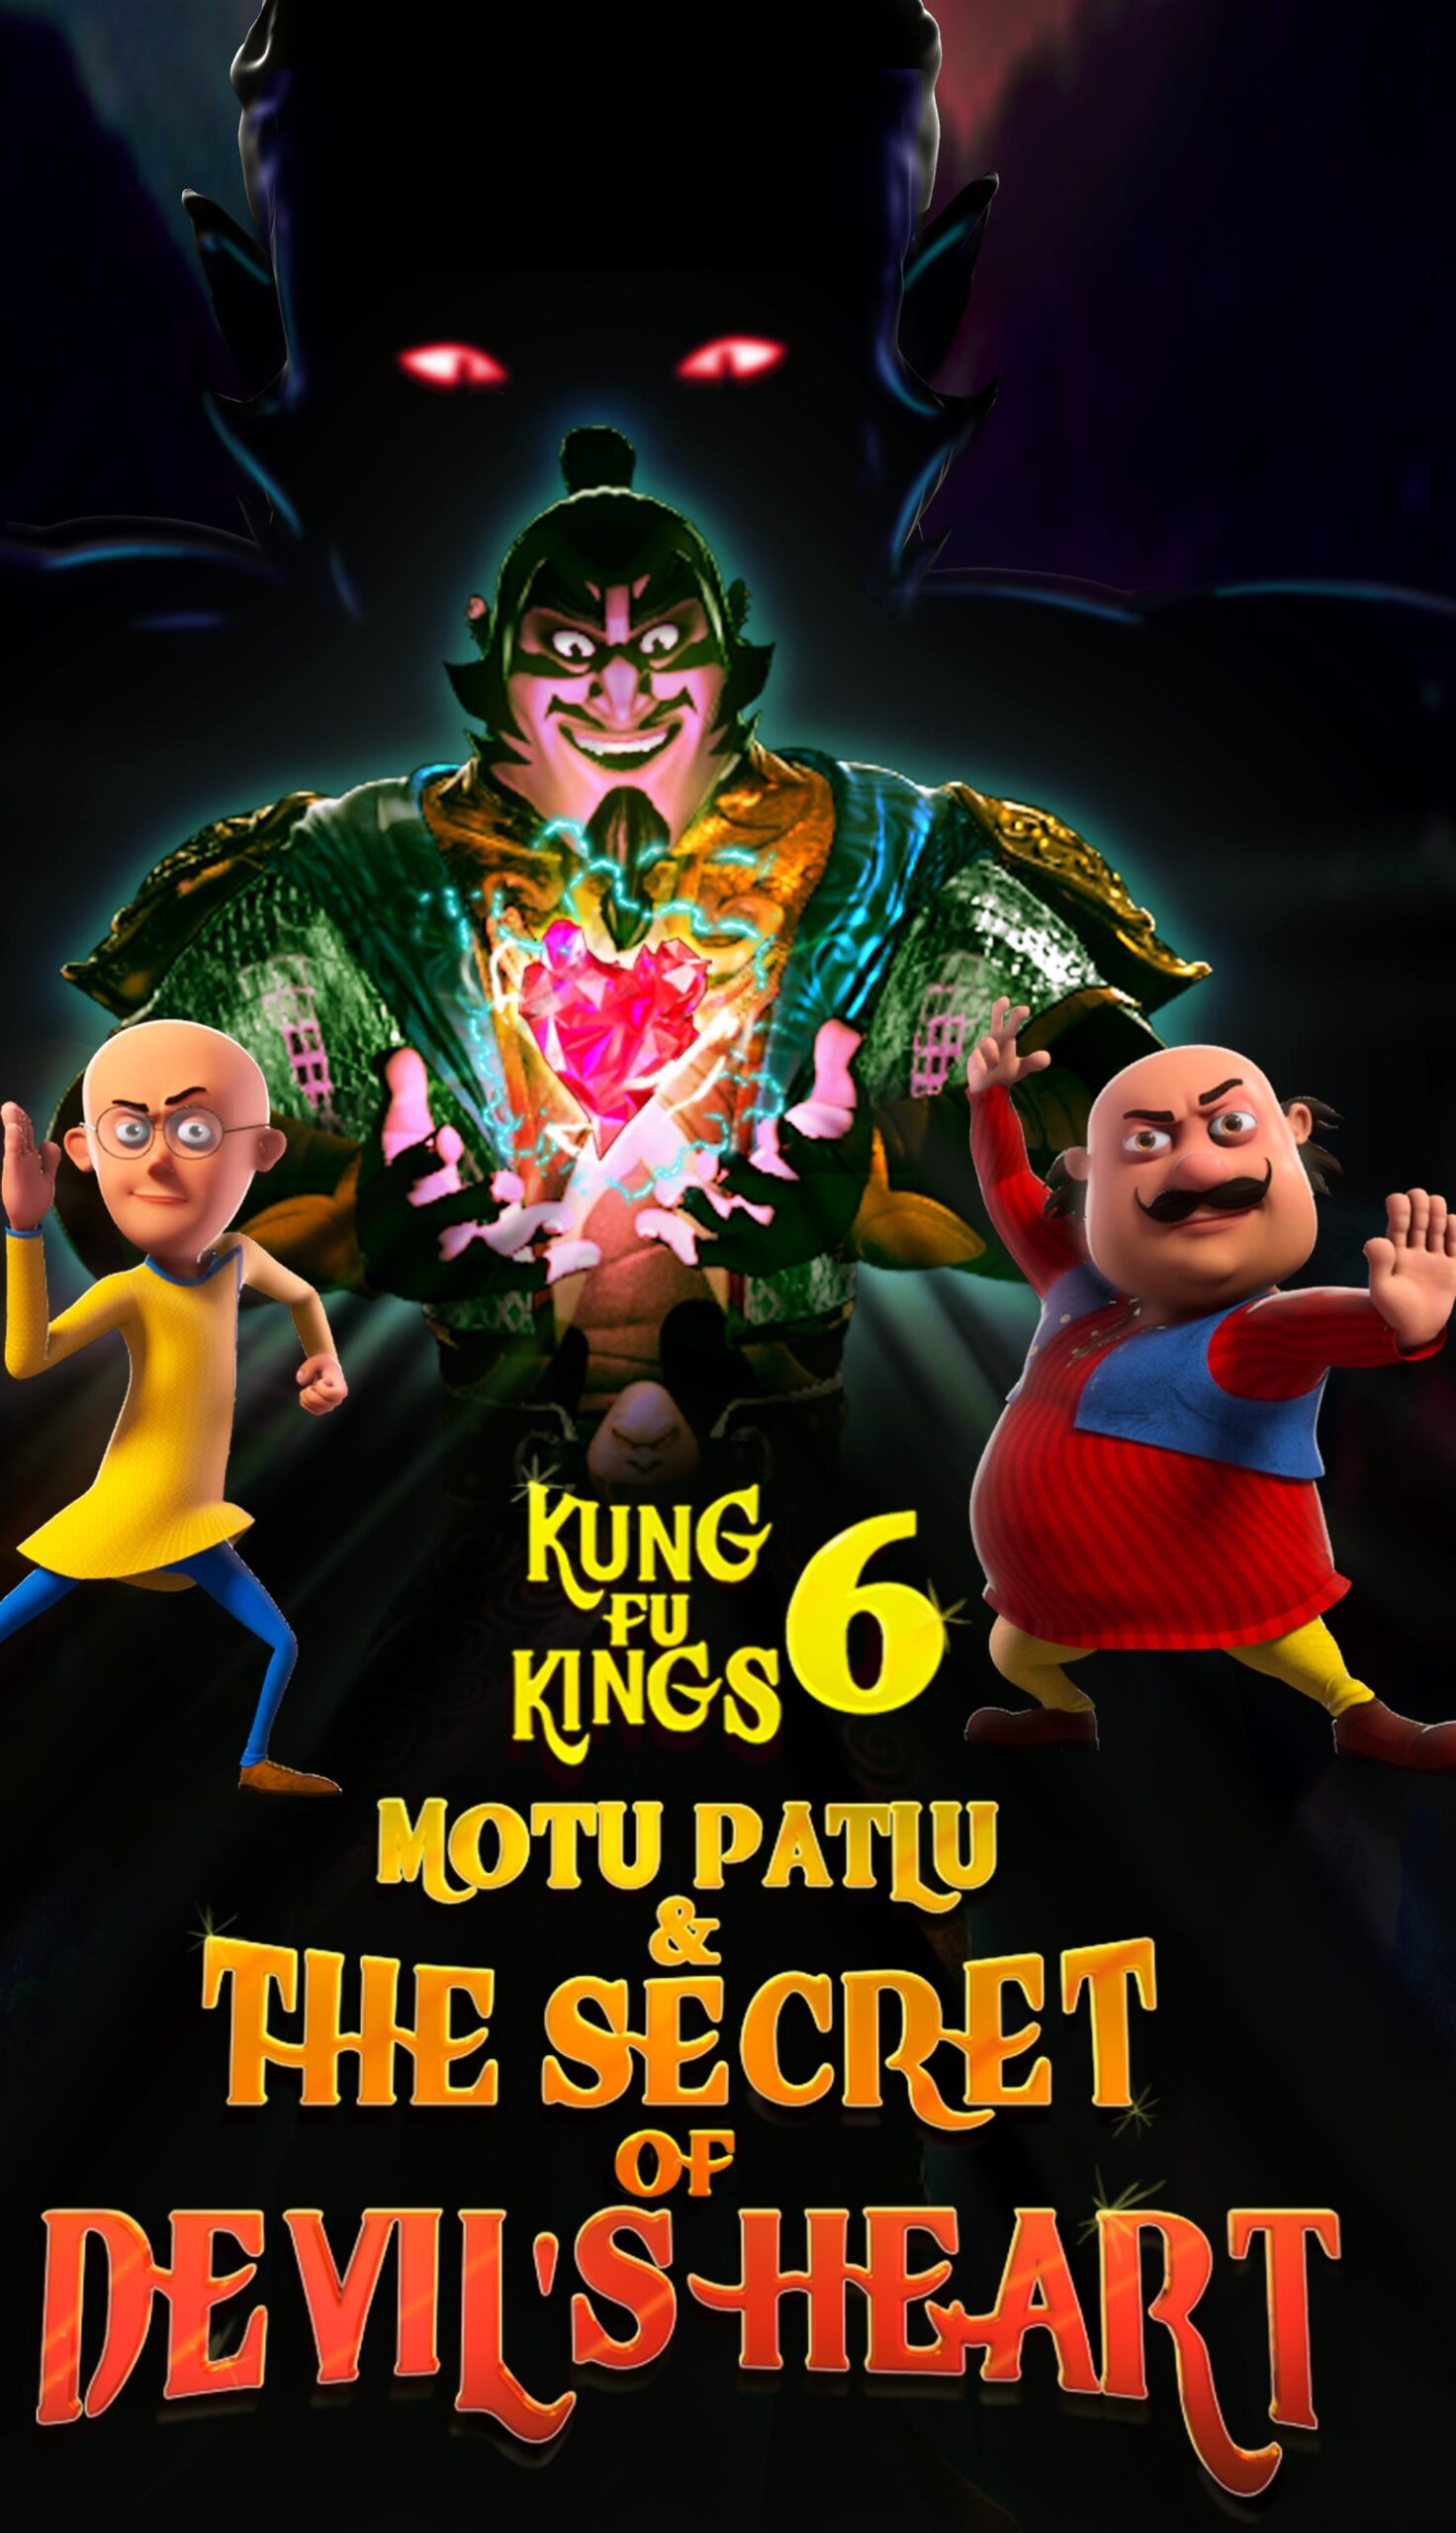 Motu Patlu and The Secret of Devils Heart 2022 Tamil Dubbed Animation Movie Online